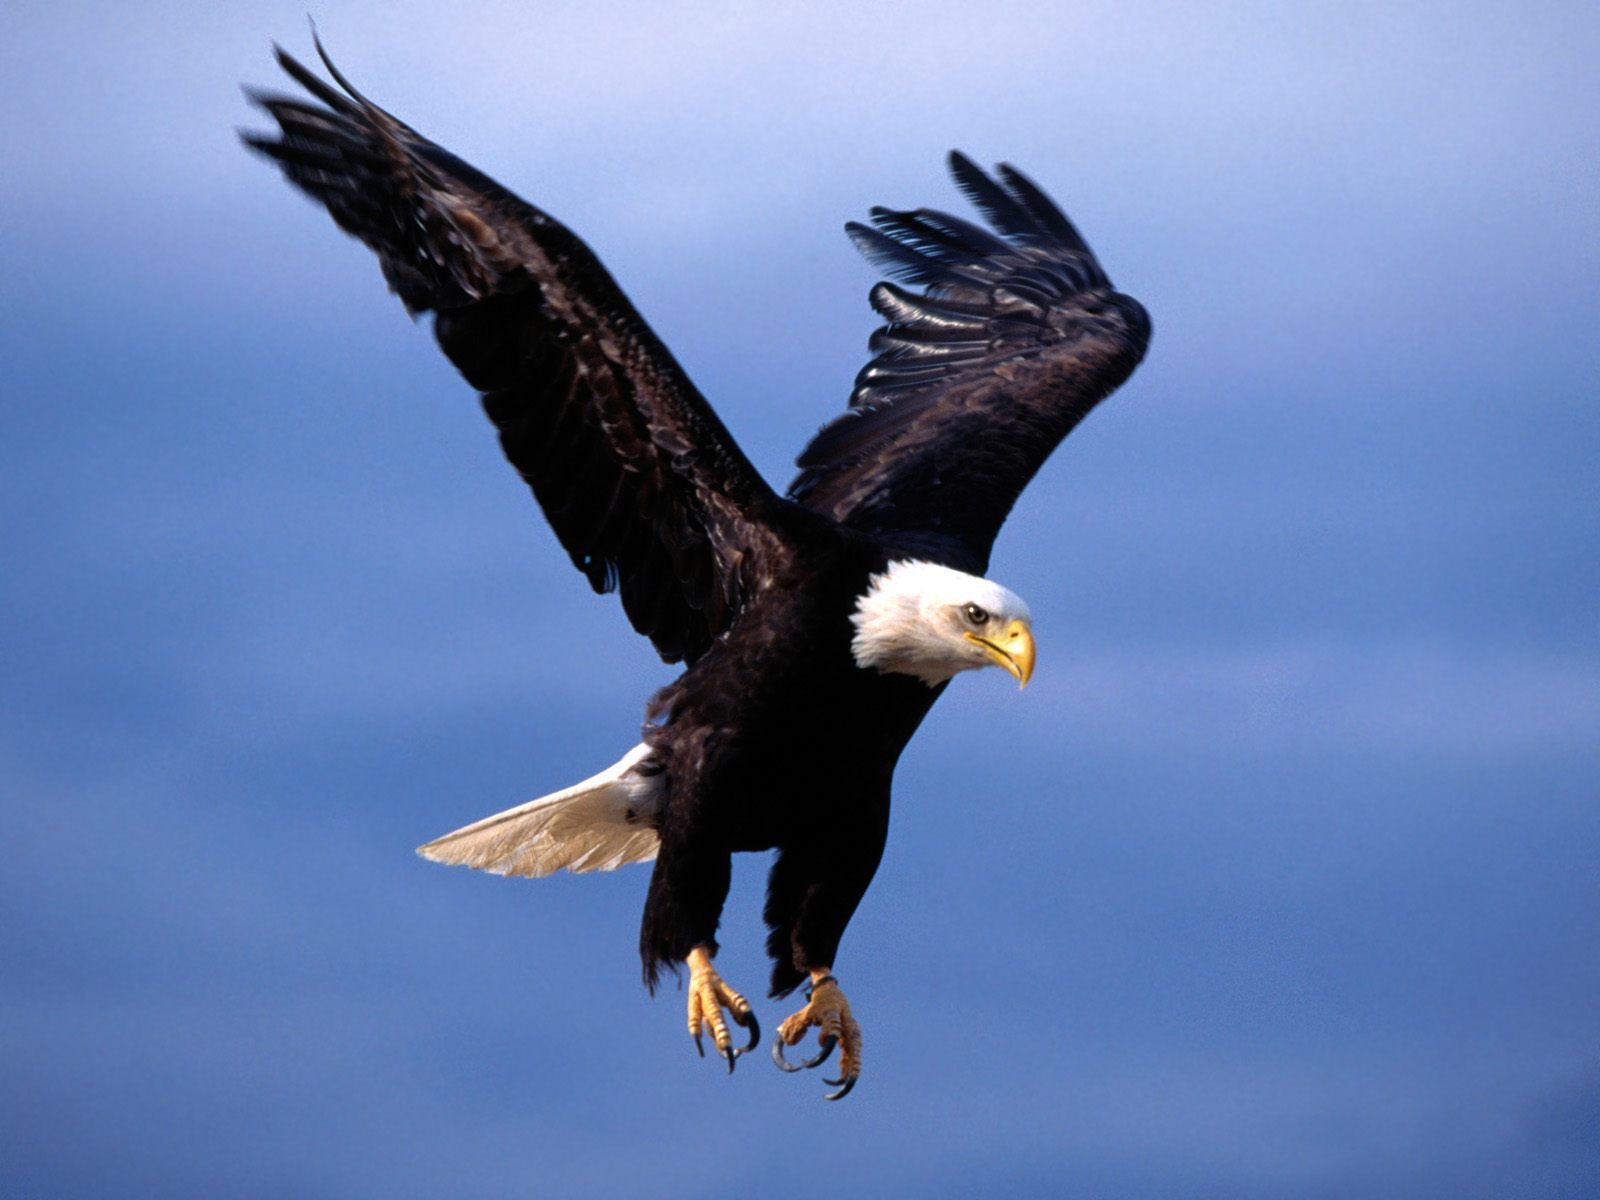 Mobile Desktop Background Beautiful Pictures Of Eagles